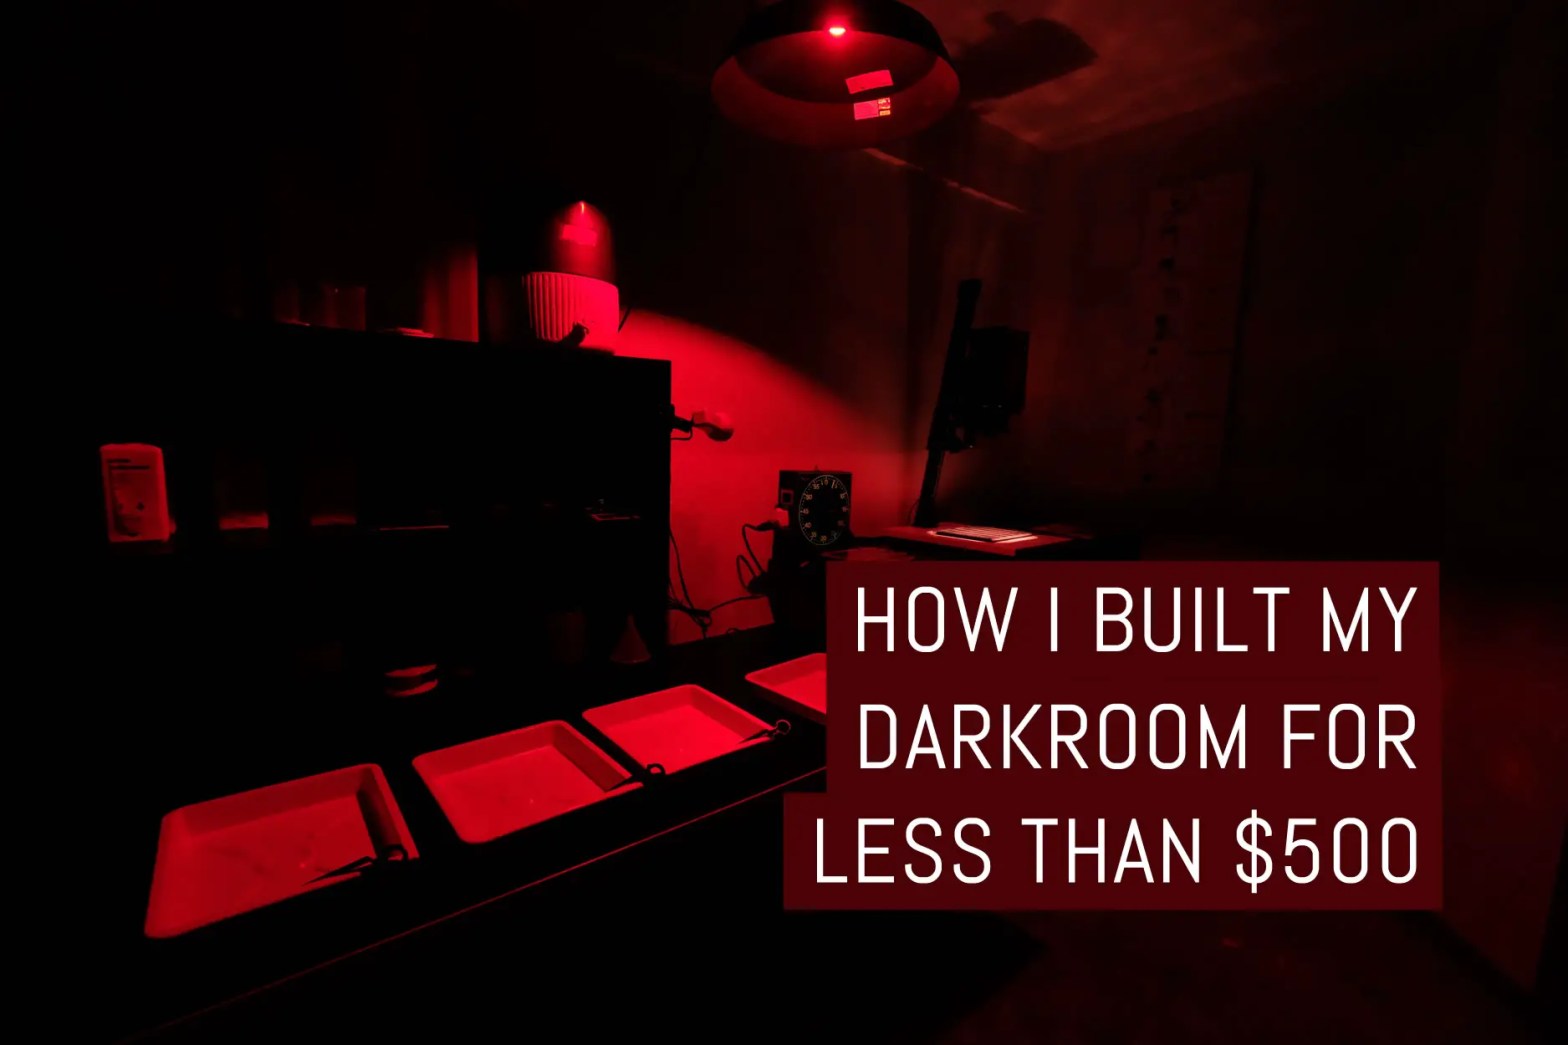 How I built my darkroom for less than $500